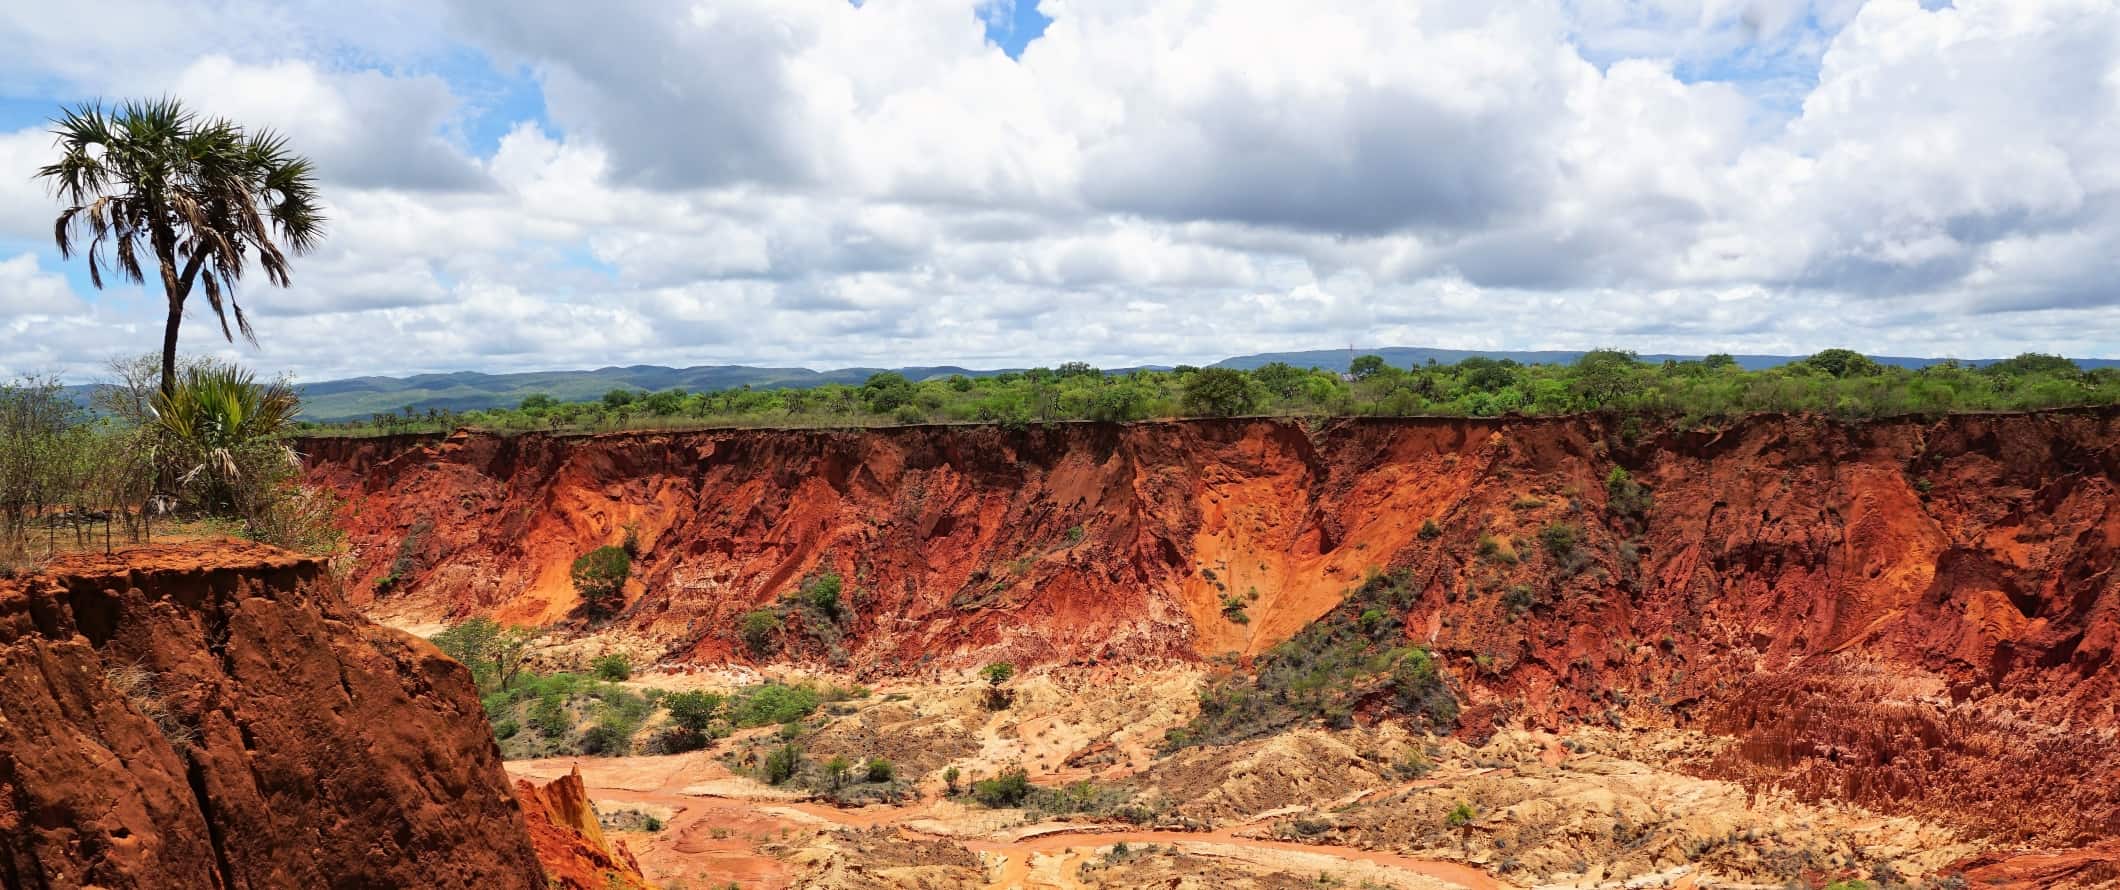 The dramatic bright red canyons of Tsingy Rouge National Park in Madagascar, Africa